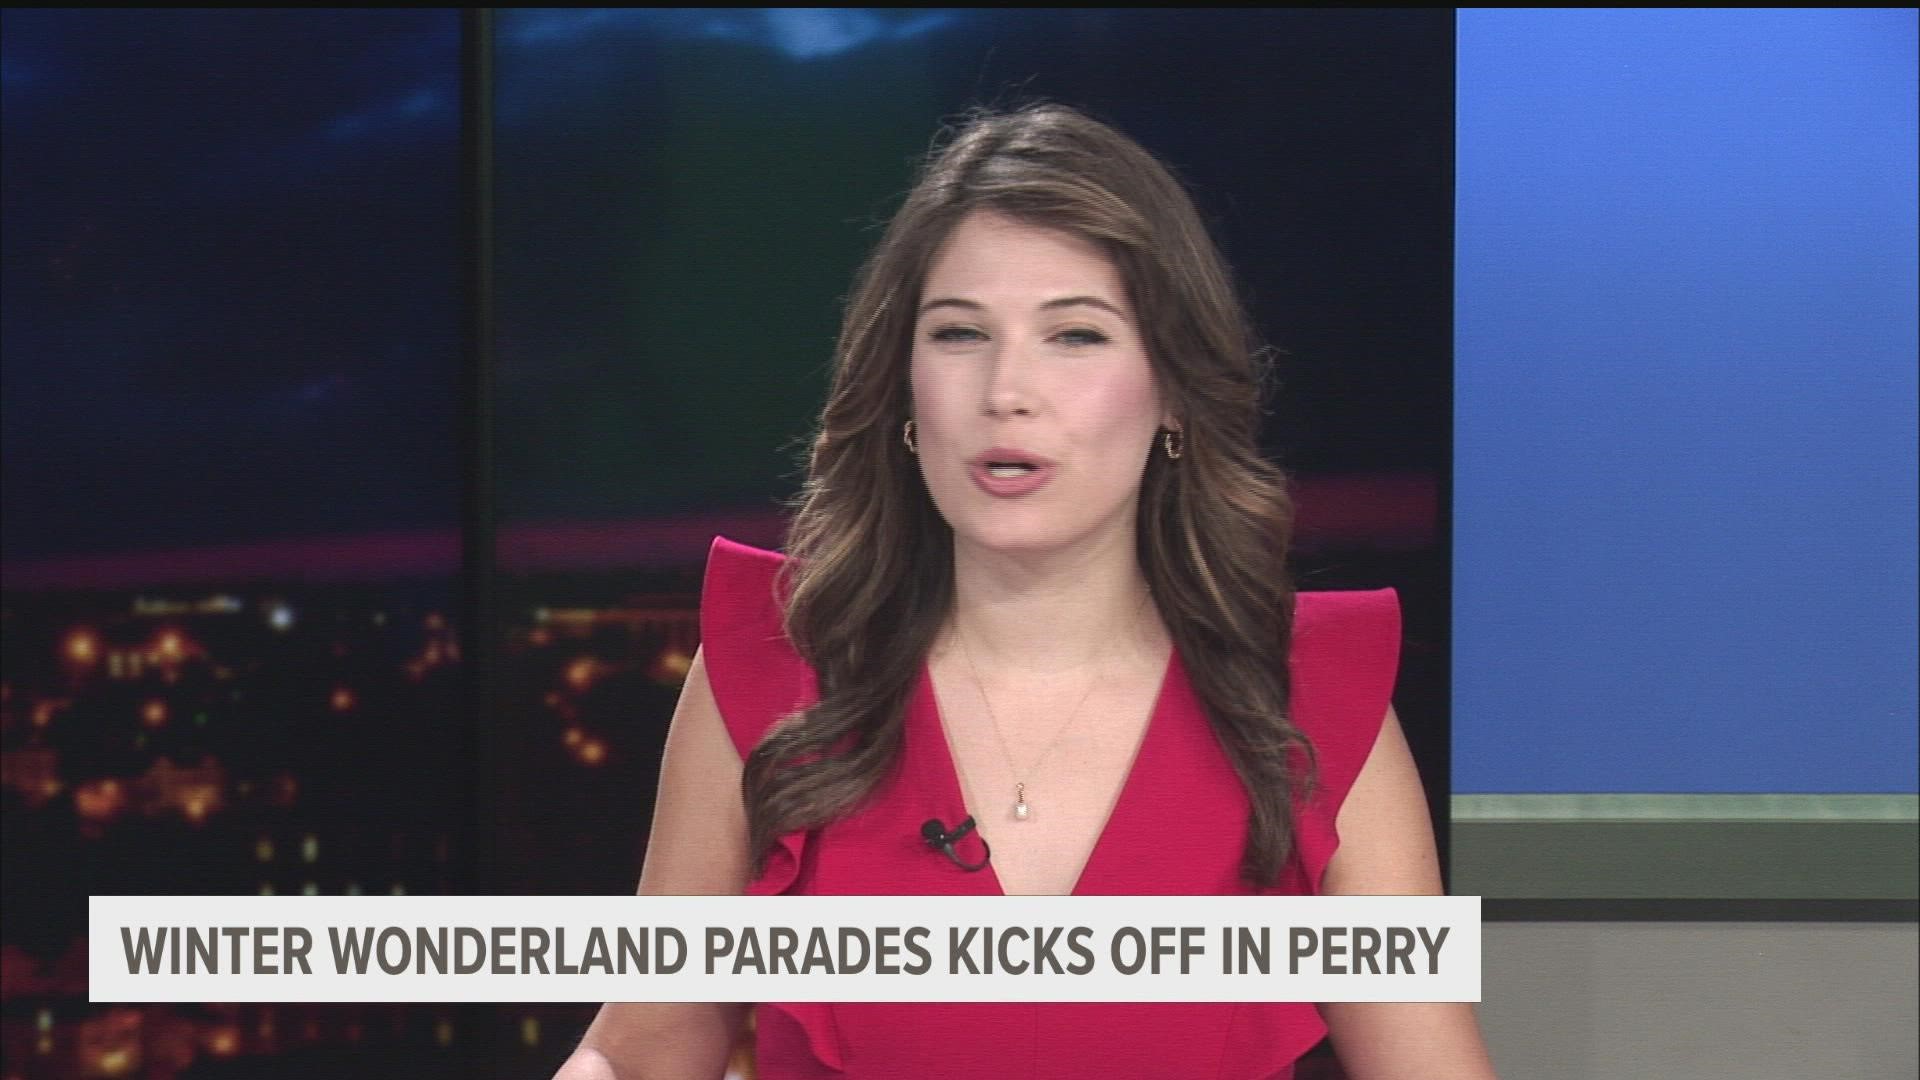 The Christmas parade in Perry was hosted by the city for the first time!